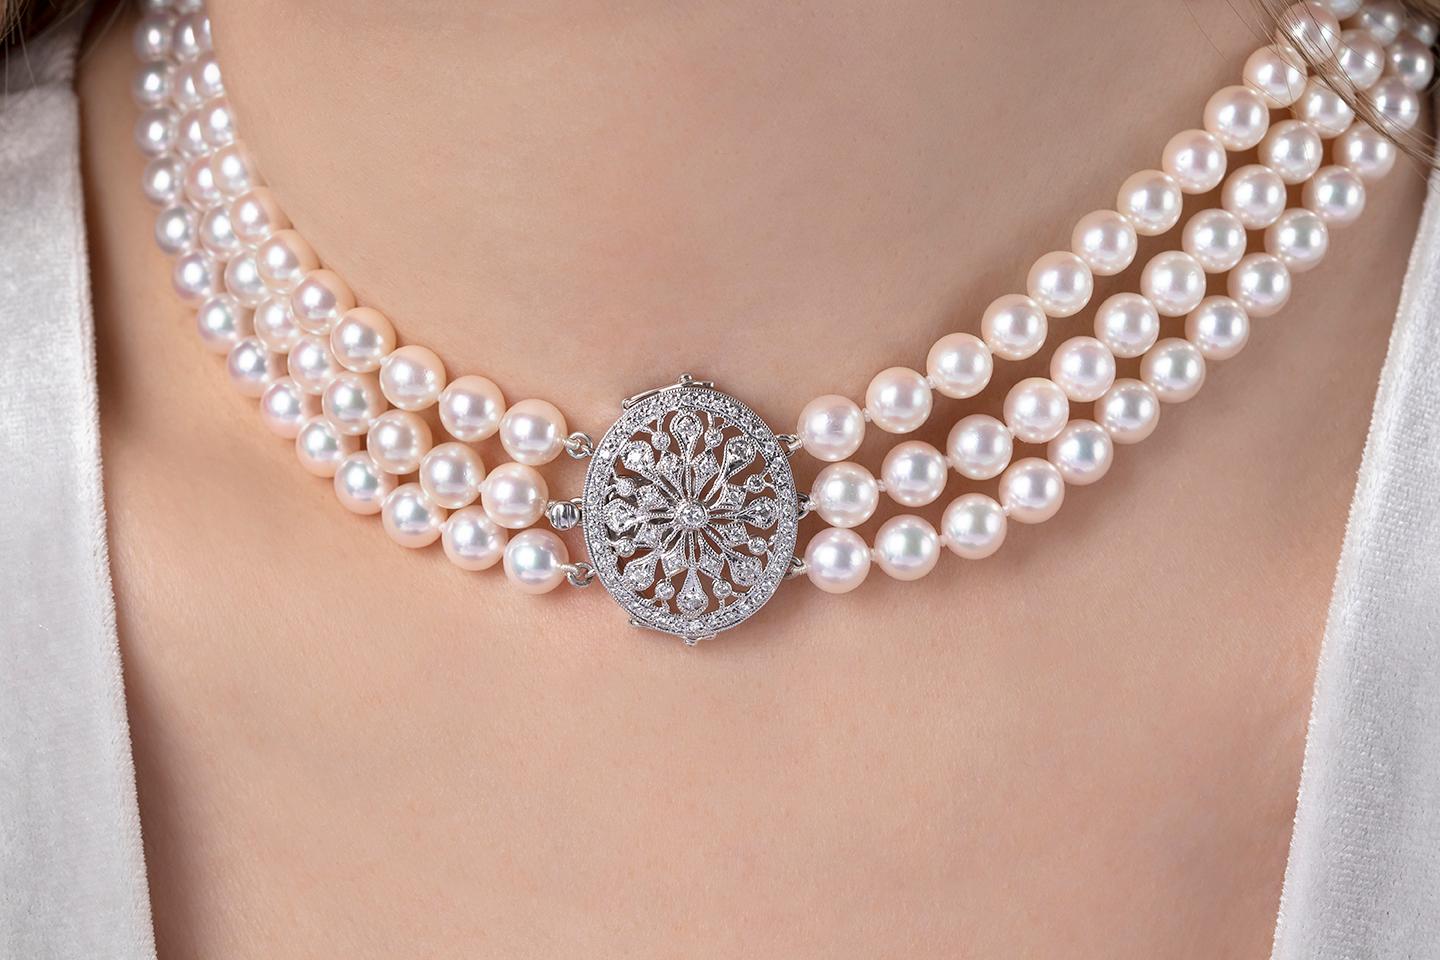 This elegant choker by Yoko London features three rows of 6-6.5mm Akoya pearls, offset by an ornate, 18 Karat white gold diamond-set choker. Timeless and sophisticated, this choker will elevate any evening look. Designed and hand strung in our